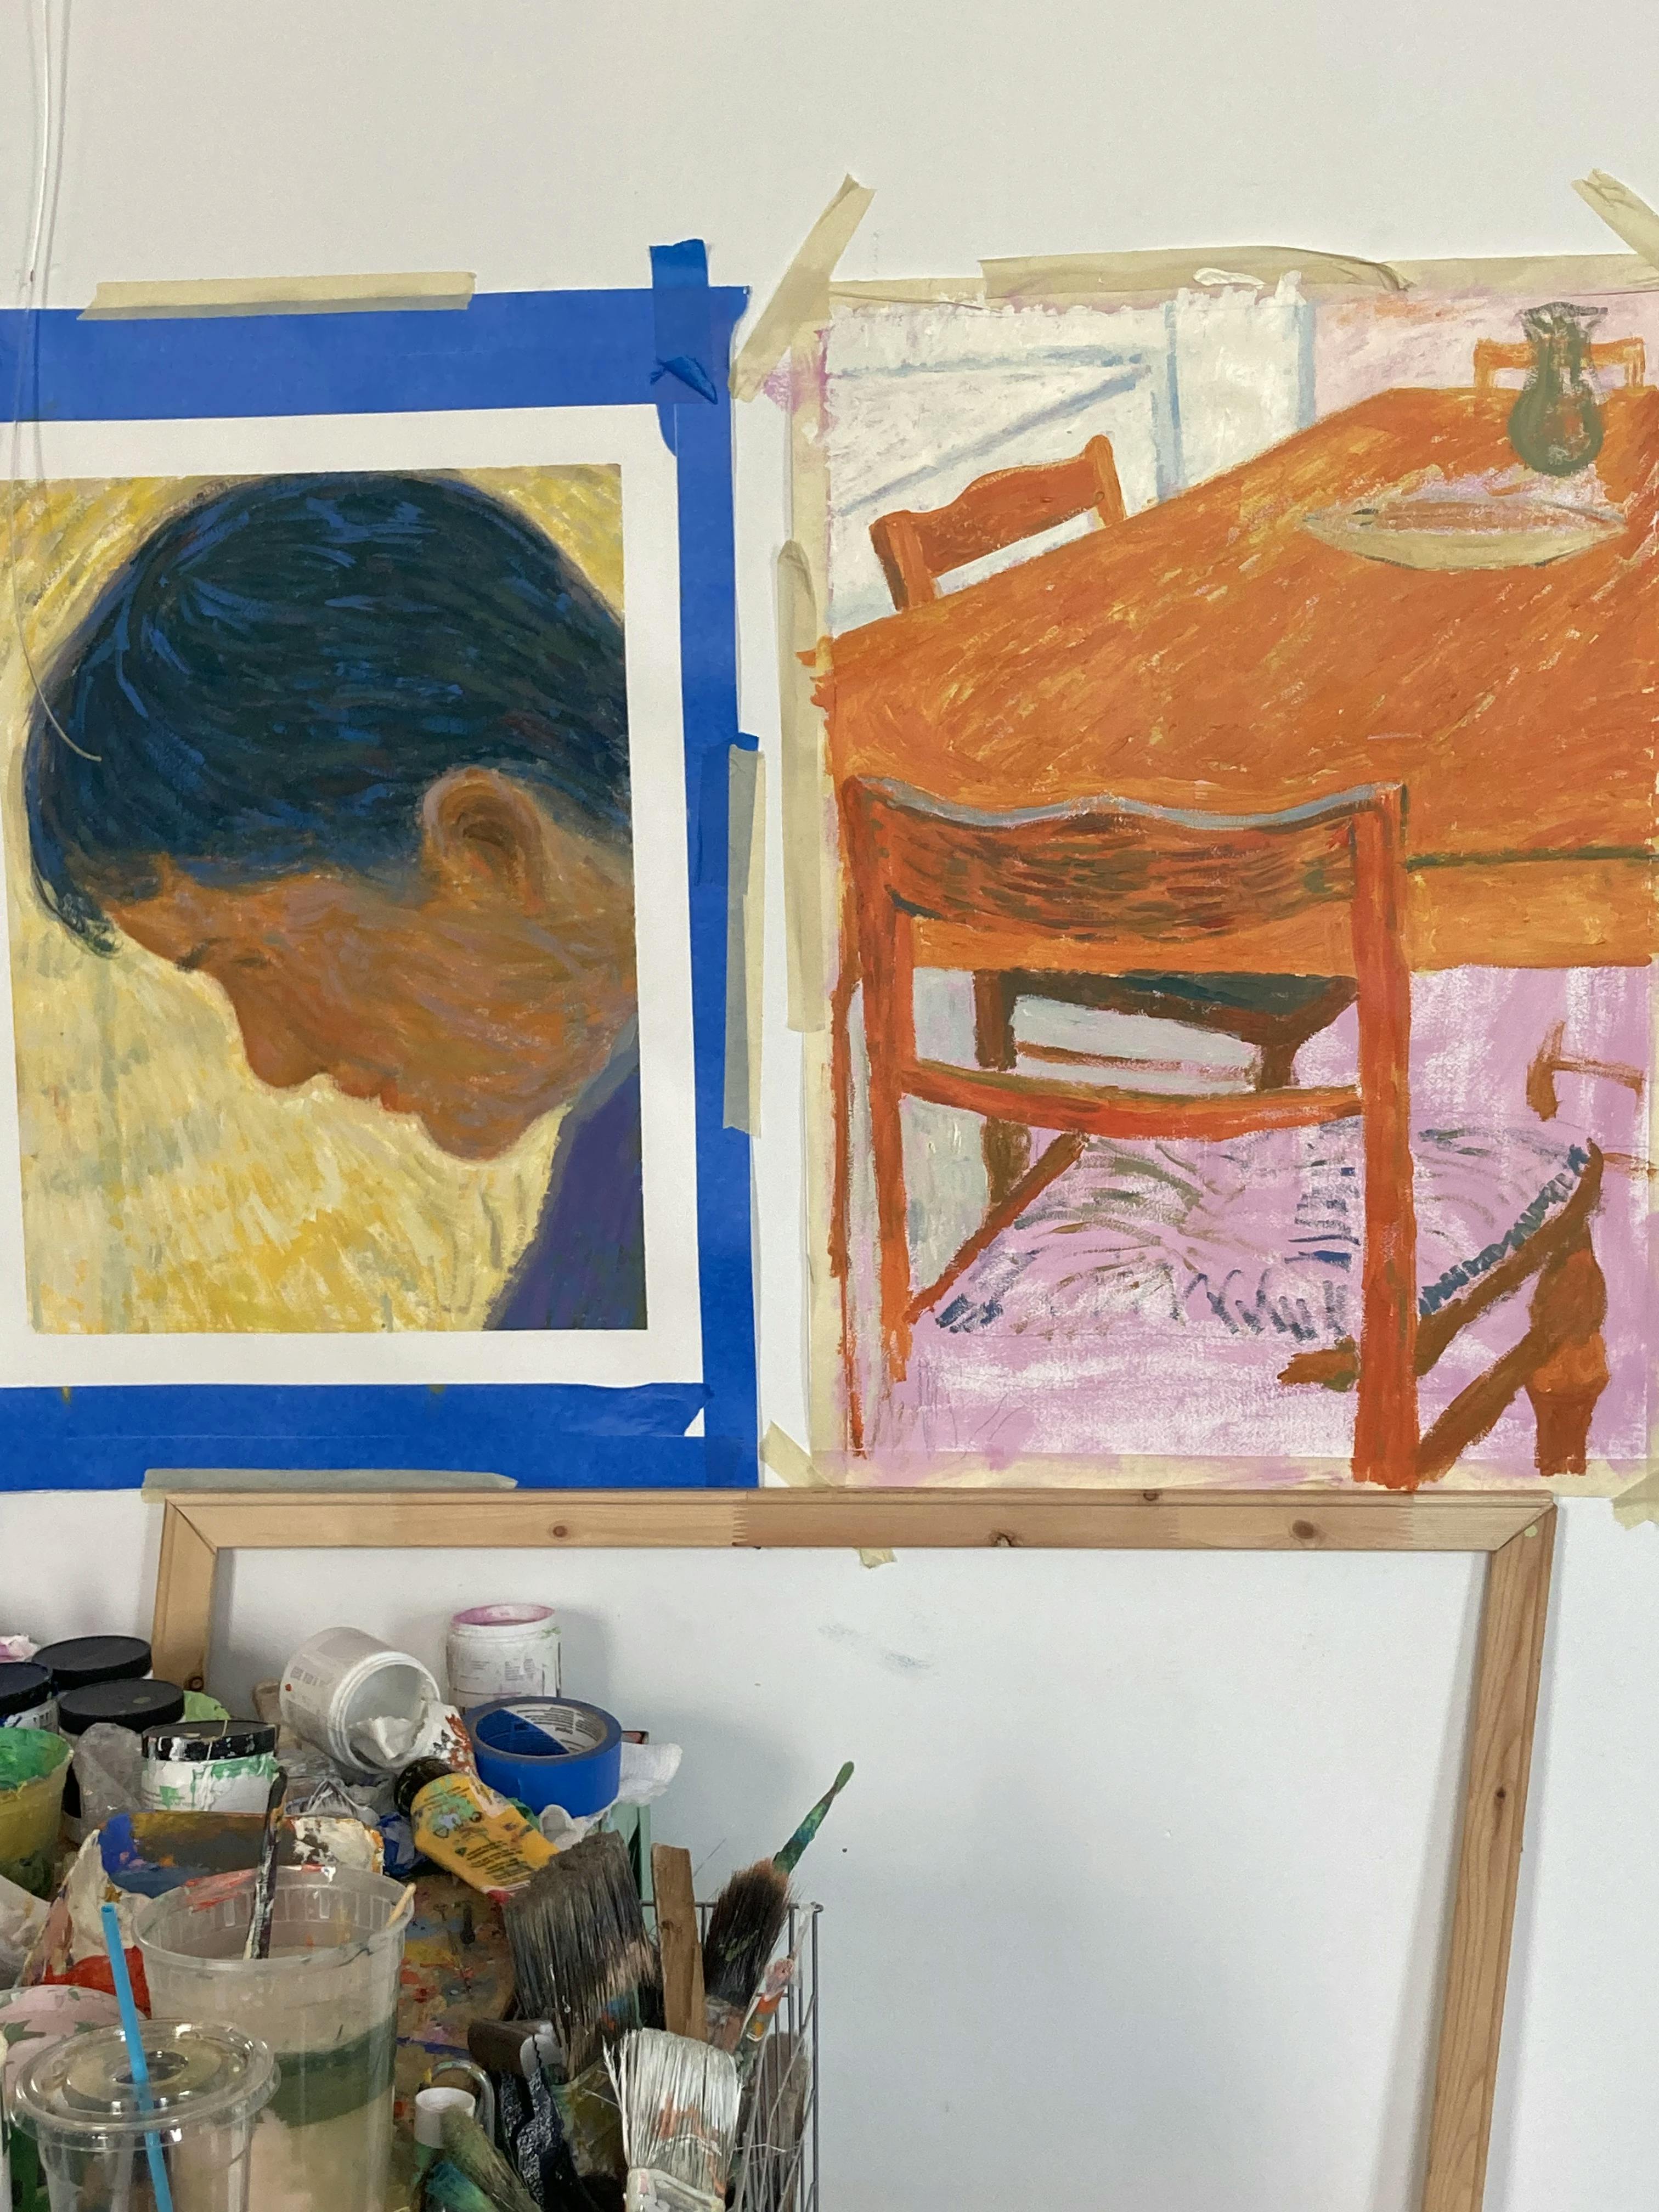 Two paintings by artist Jackson Joyce, one a portrait of a man and the other of a wooden table, taped to a white wall in his studio.